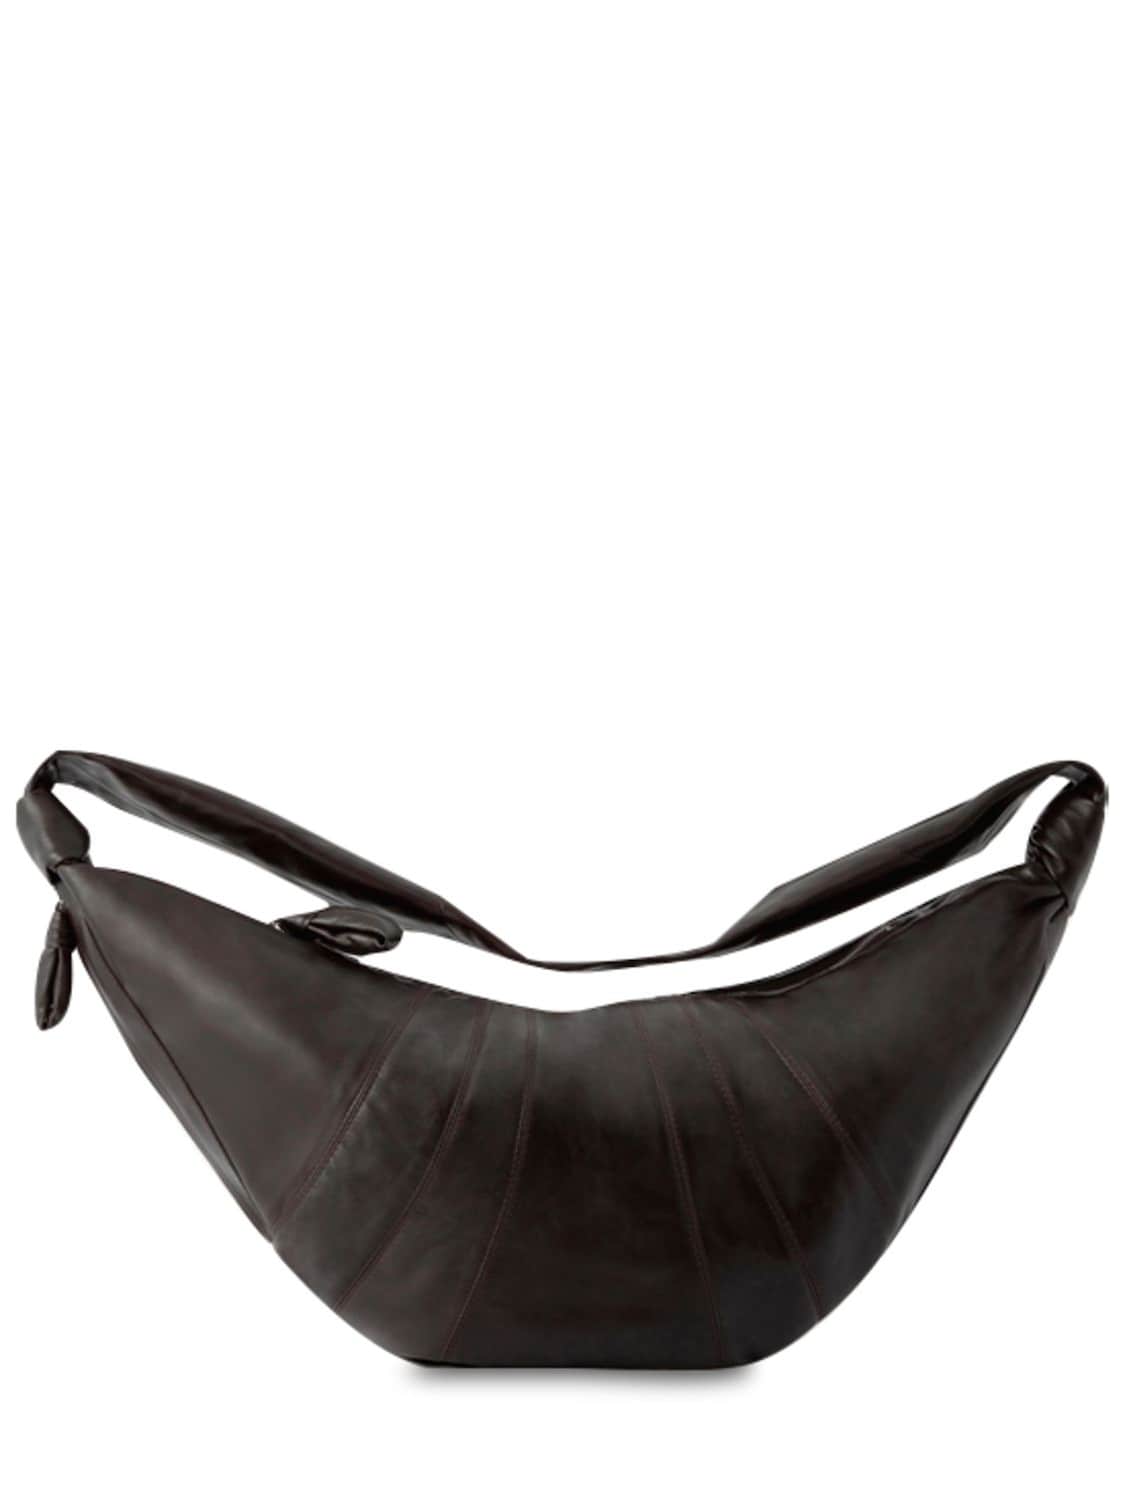 Lemaire Large Croissant Soft Nappa Shoulder Bag In Dark Chocolate